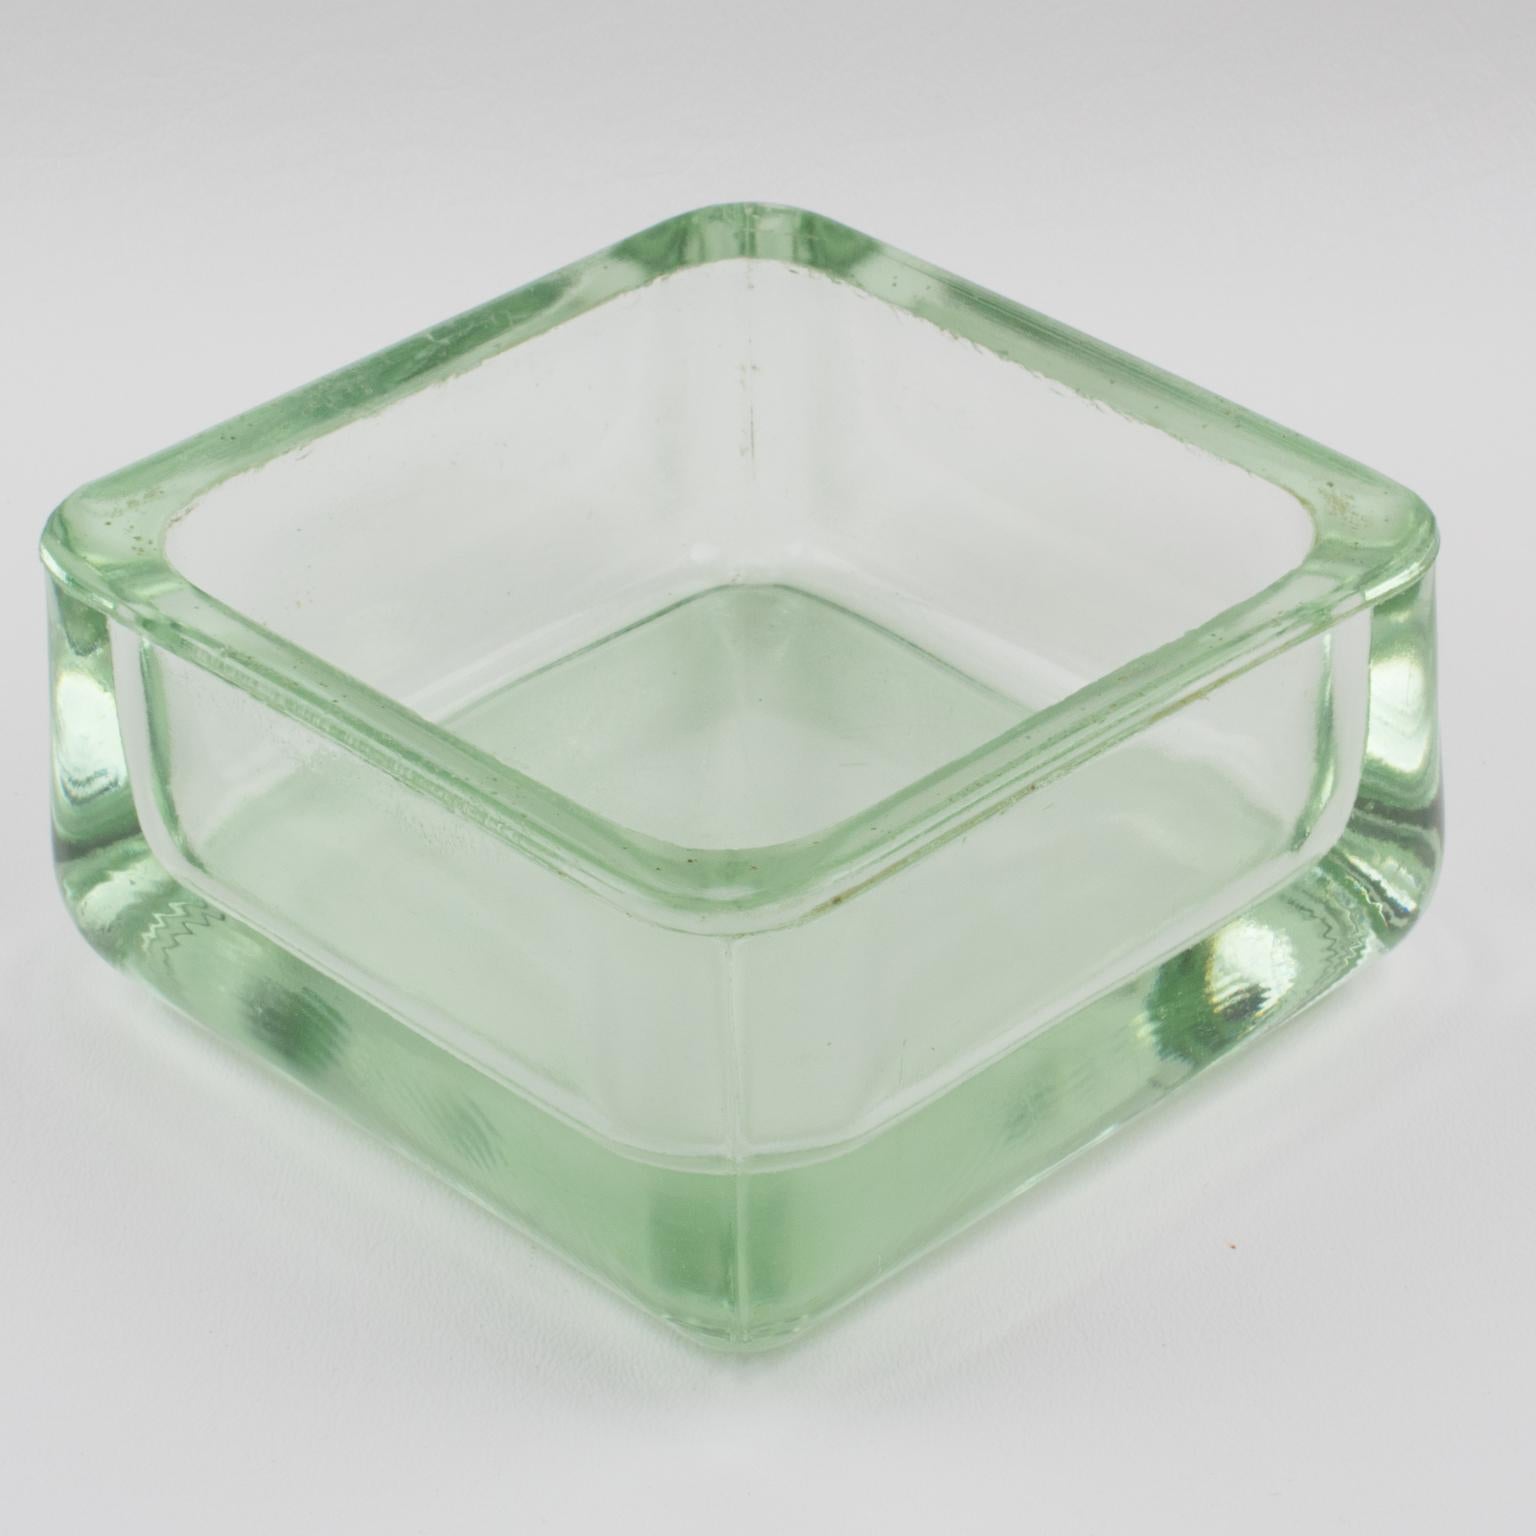 Mid-Century Modern Designed by Le Corbusier for Lumax Molded Glass Desk Accessory Ashtray Catchall